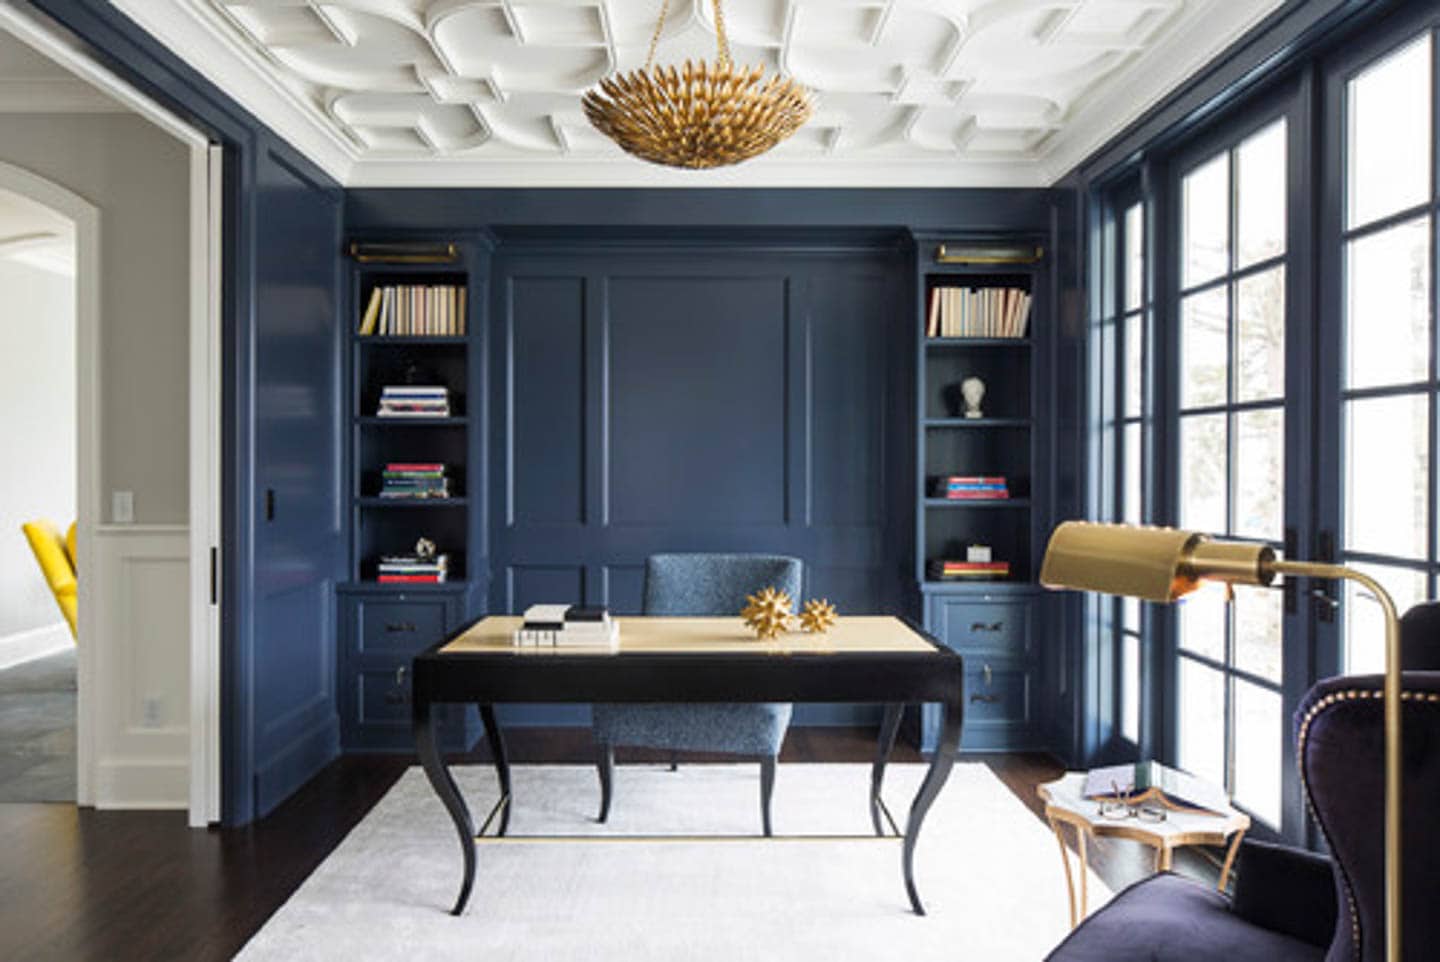 Home office with dark blue walls and shelves, a large window, white ceiling and area rug, and black desk